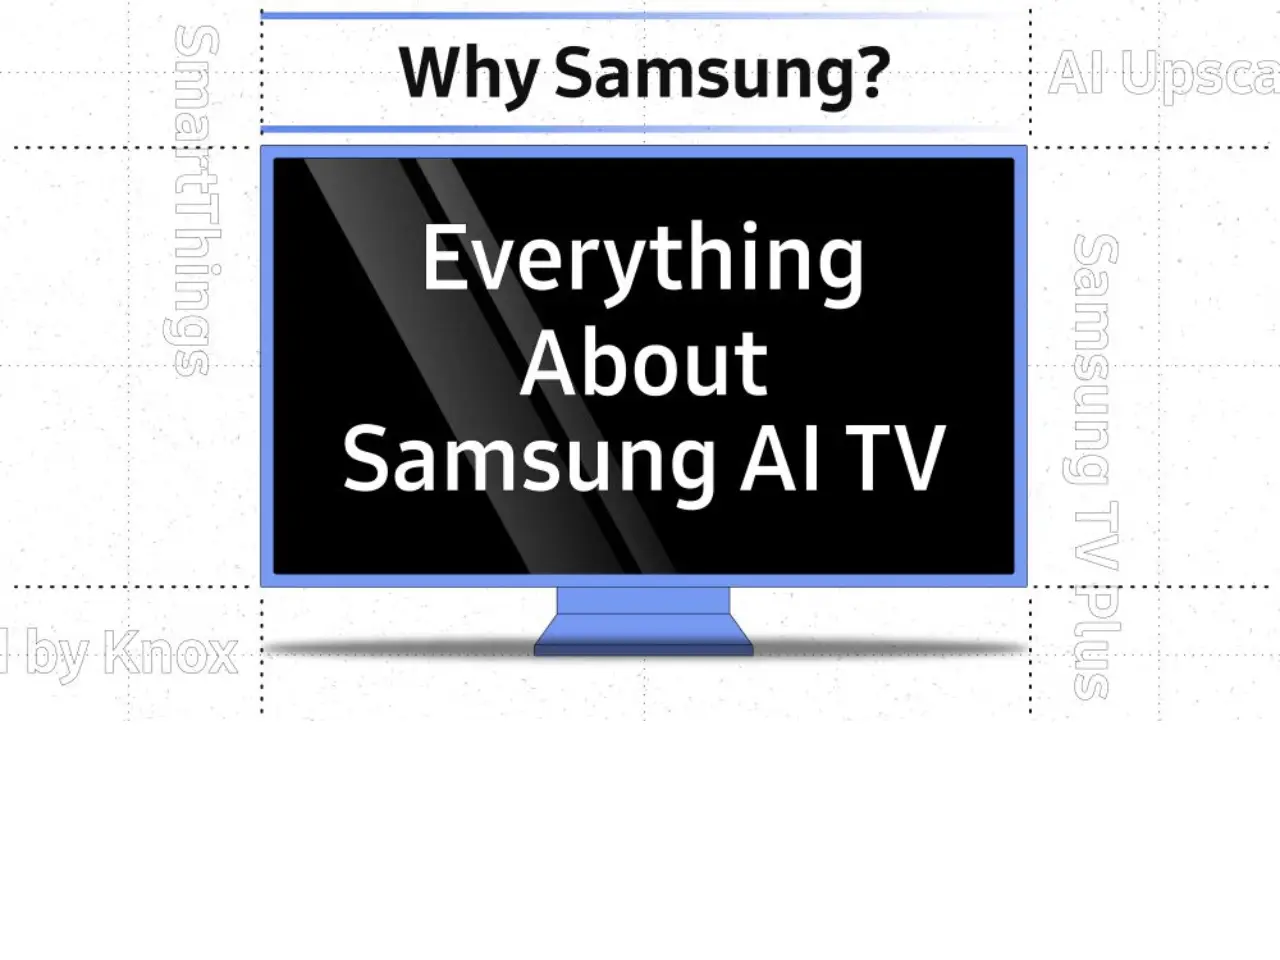 Samsung's AI TVs: Merging Entertainment, Convenience, and Security